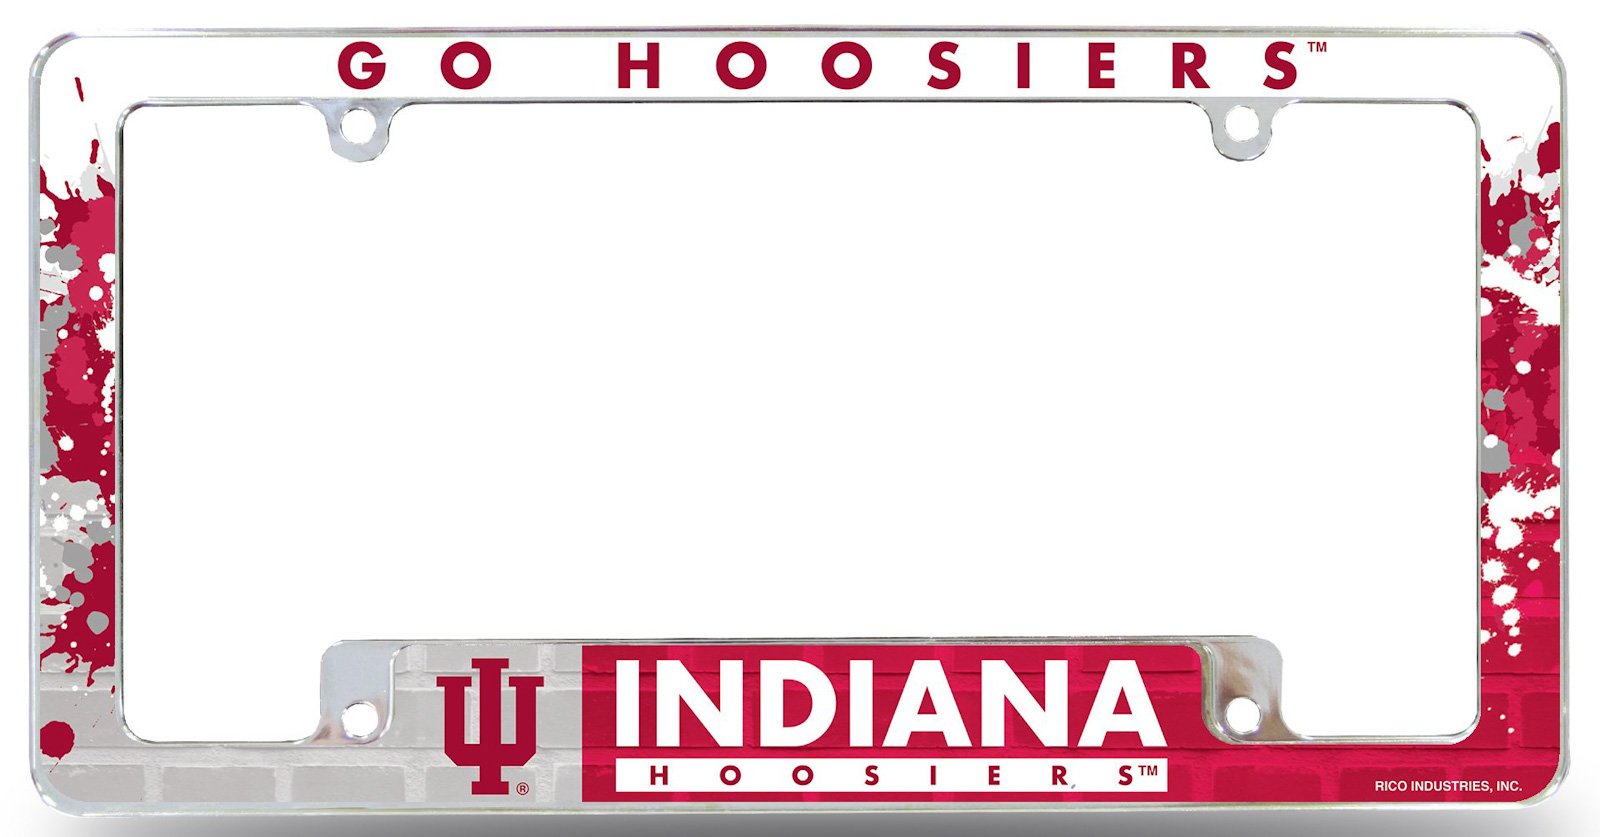 Indiana Hoosiers License Plate Frame Metal Tag Cover EZ View All Over Design Heavy Gauge University